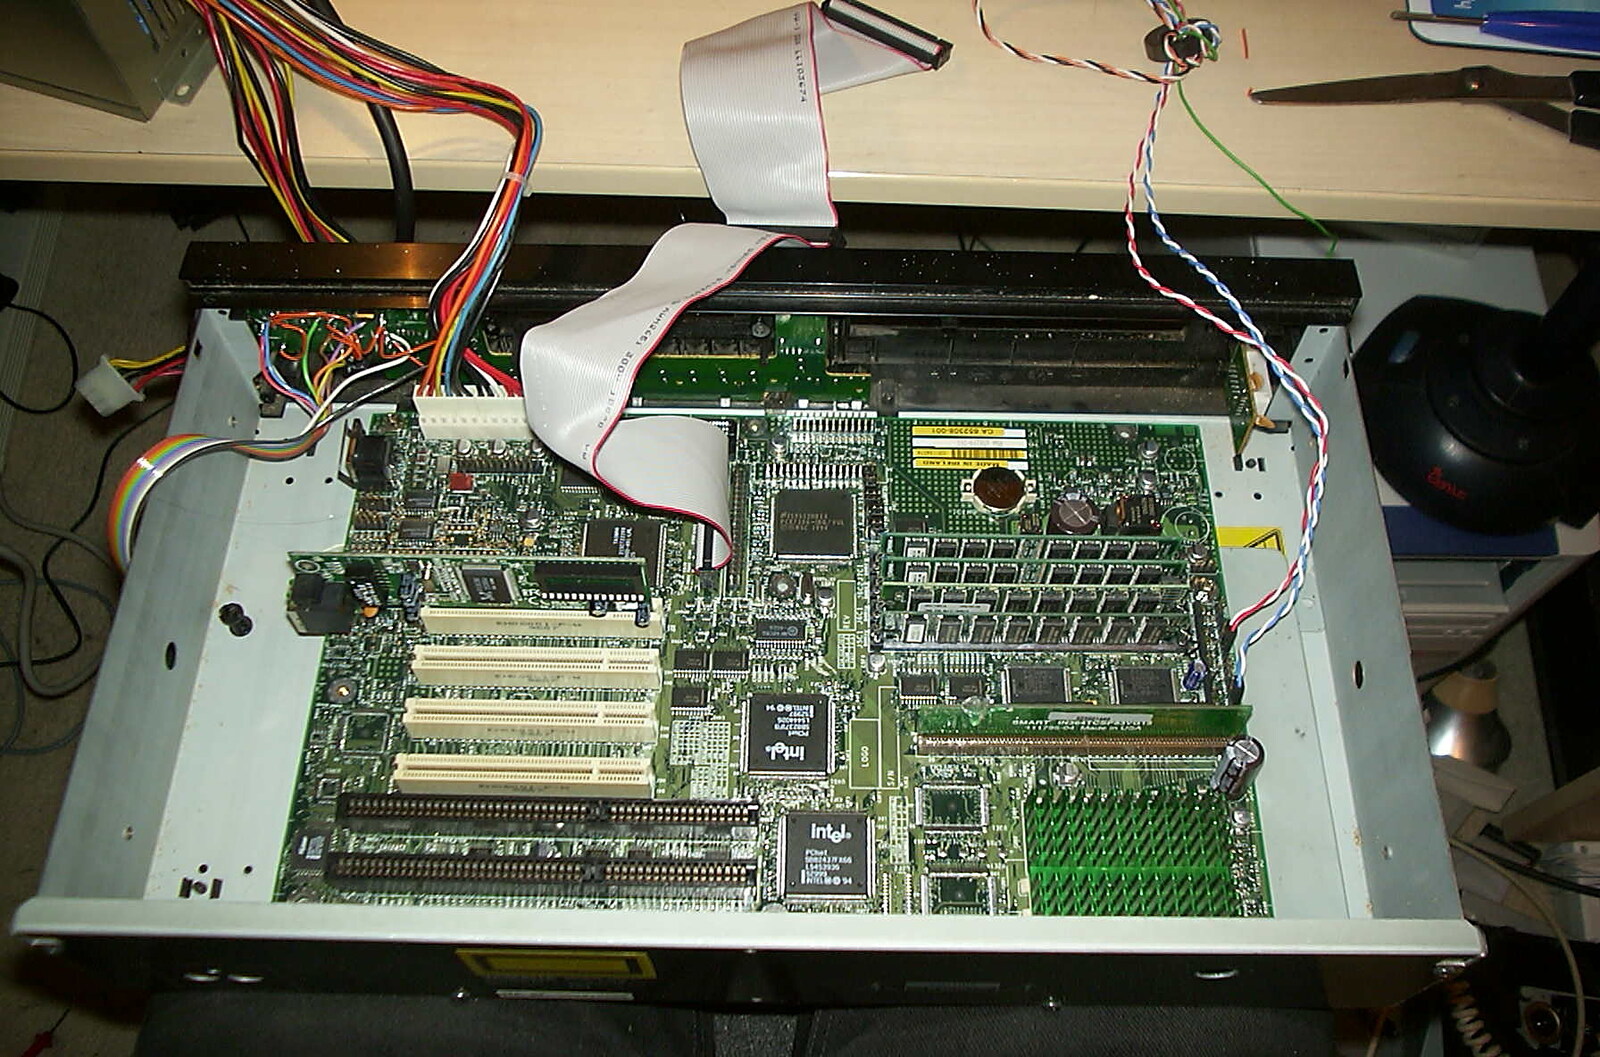 A motherboard is installed in a CD player from A Hard-Drive Clock and Other Projects, Brome, Suffolk - 28th June 2002